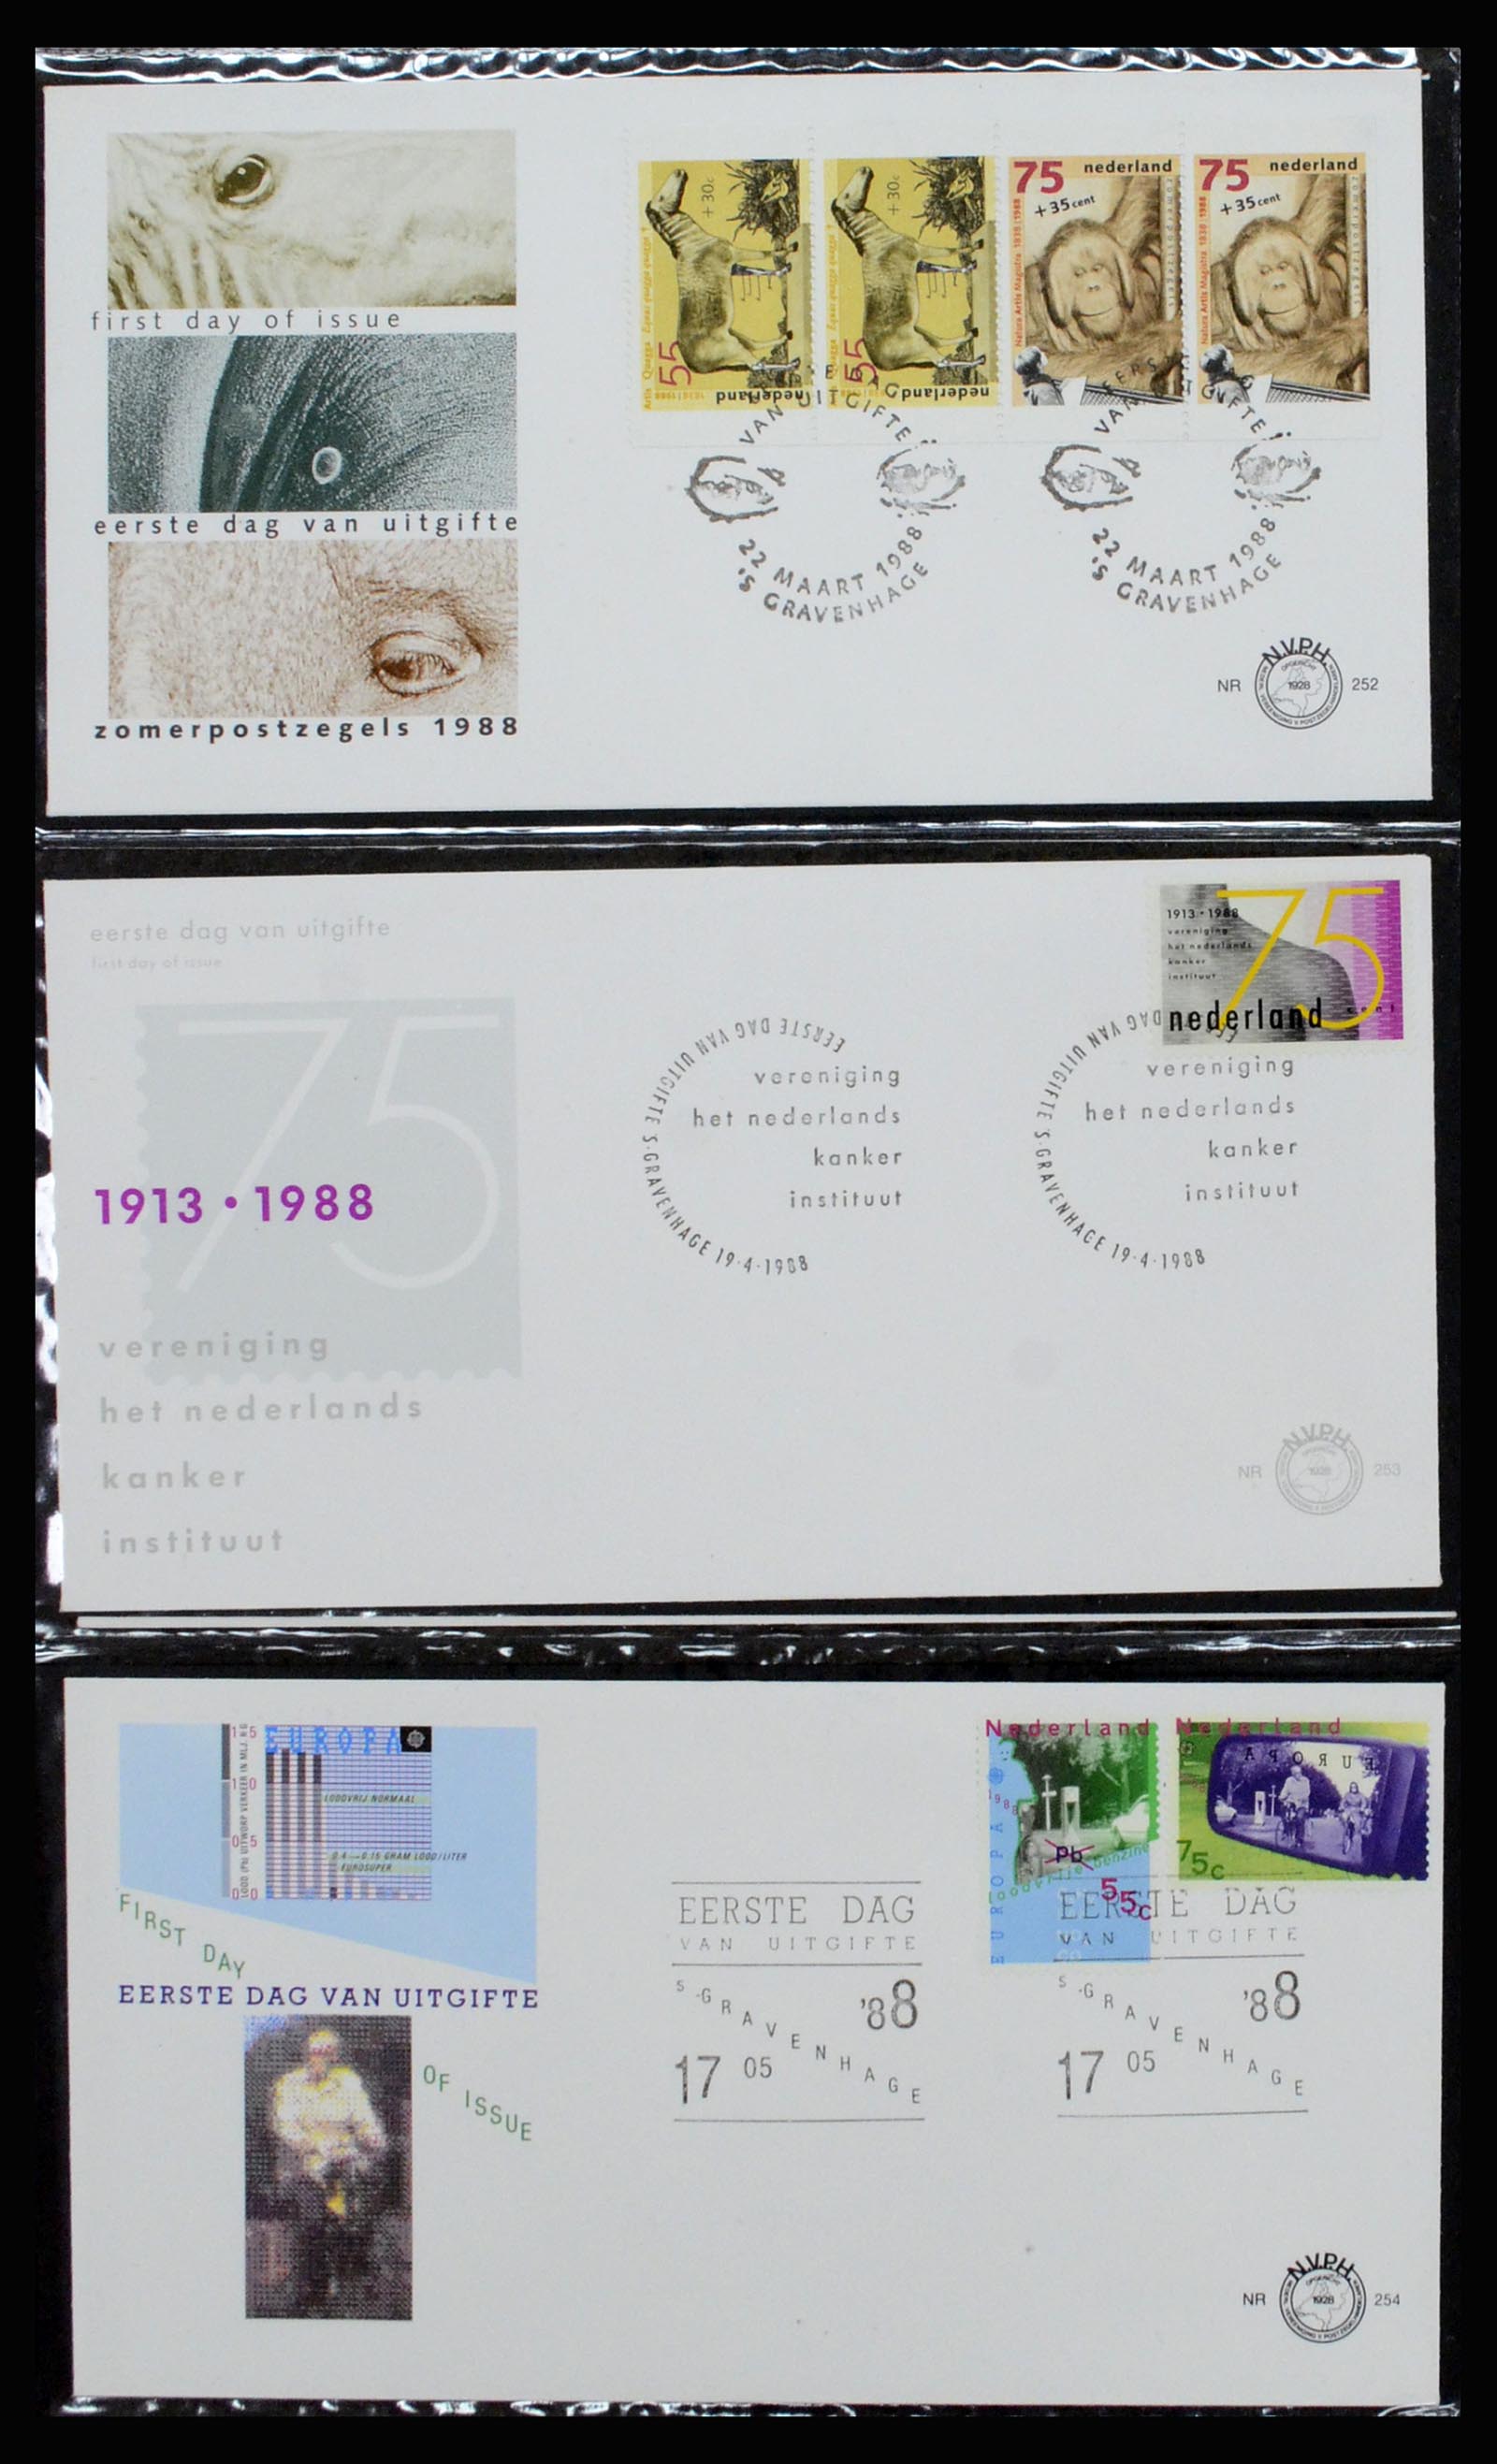 37197 096 - Stamp collection 37197 Netherlands FDC's 1950-2004.